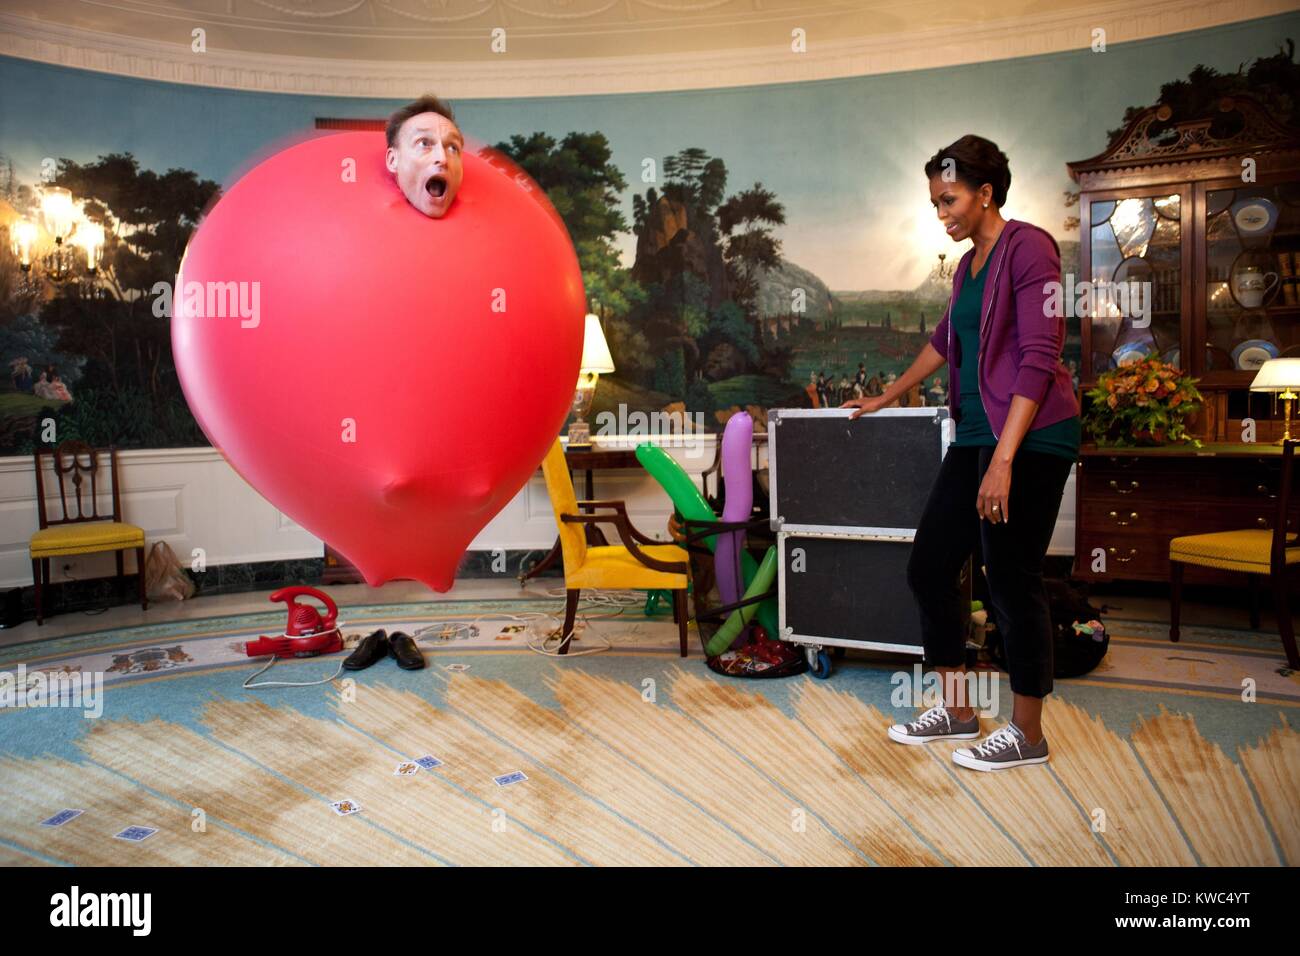 John Cassidy in a six-foot red balloon in the Diplomatic Reception Room with Michelle Obama. White House, Oct. 11, 2011. (BSLOC 2015 13 187) Stock Photo